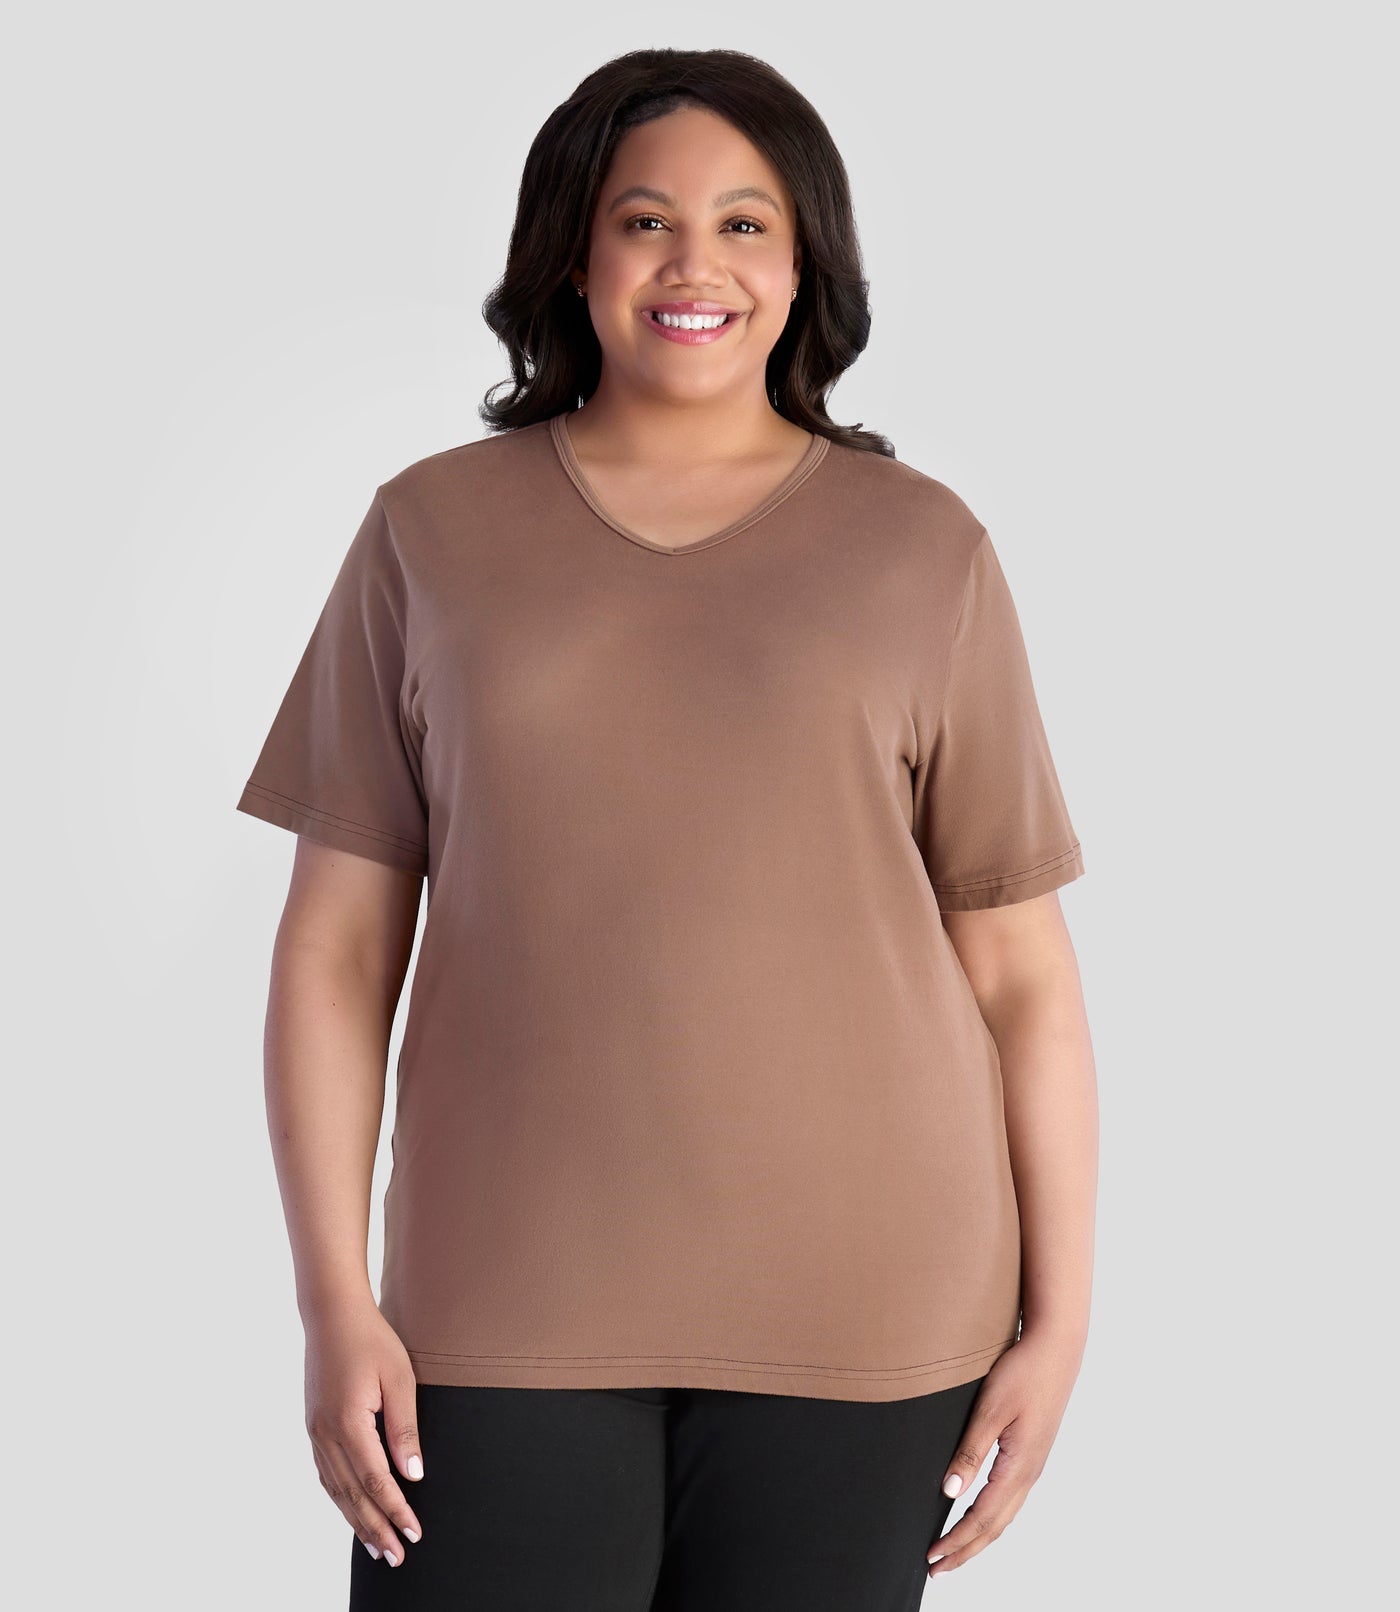 JunoActive model wearing EasyLuxe Classics V-Neck Top  in color cafe latte. Model is facing forward with her arms by her side.